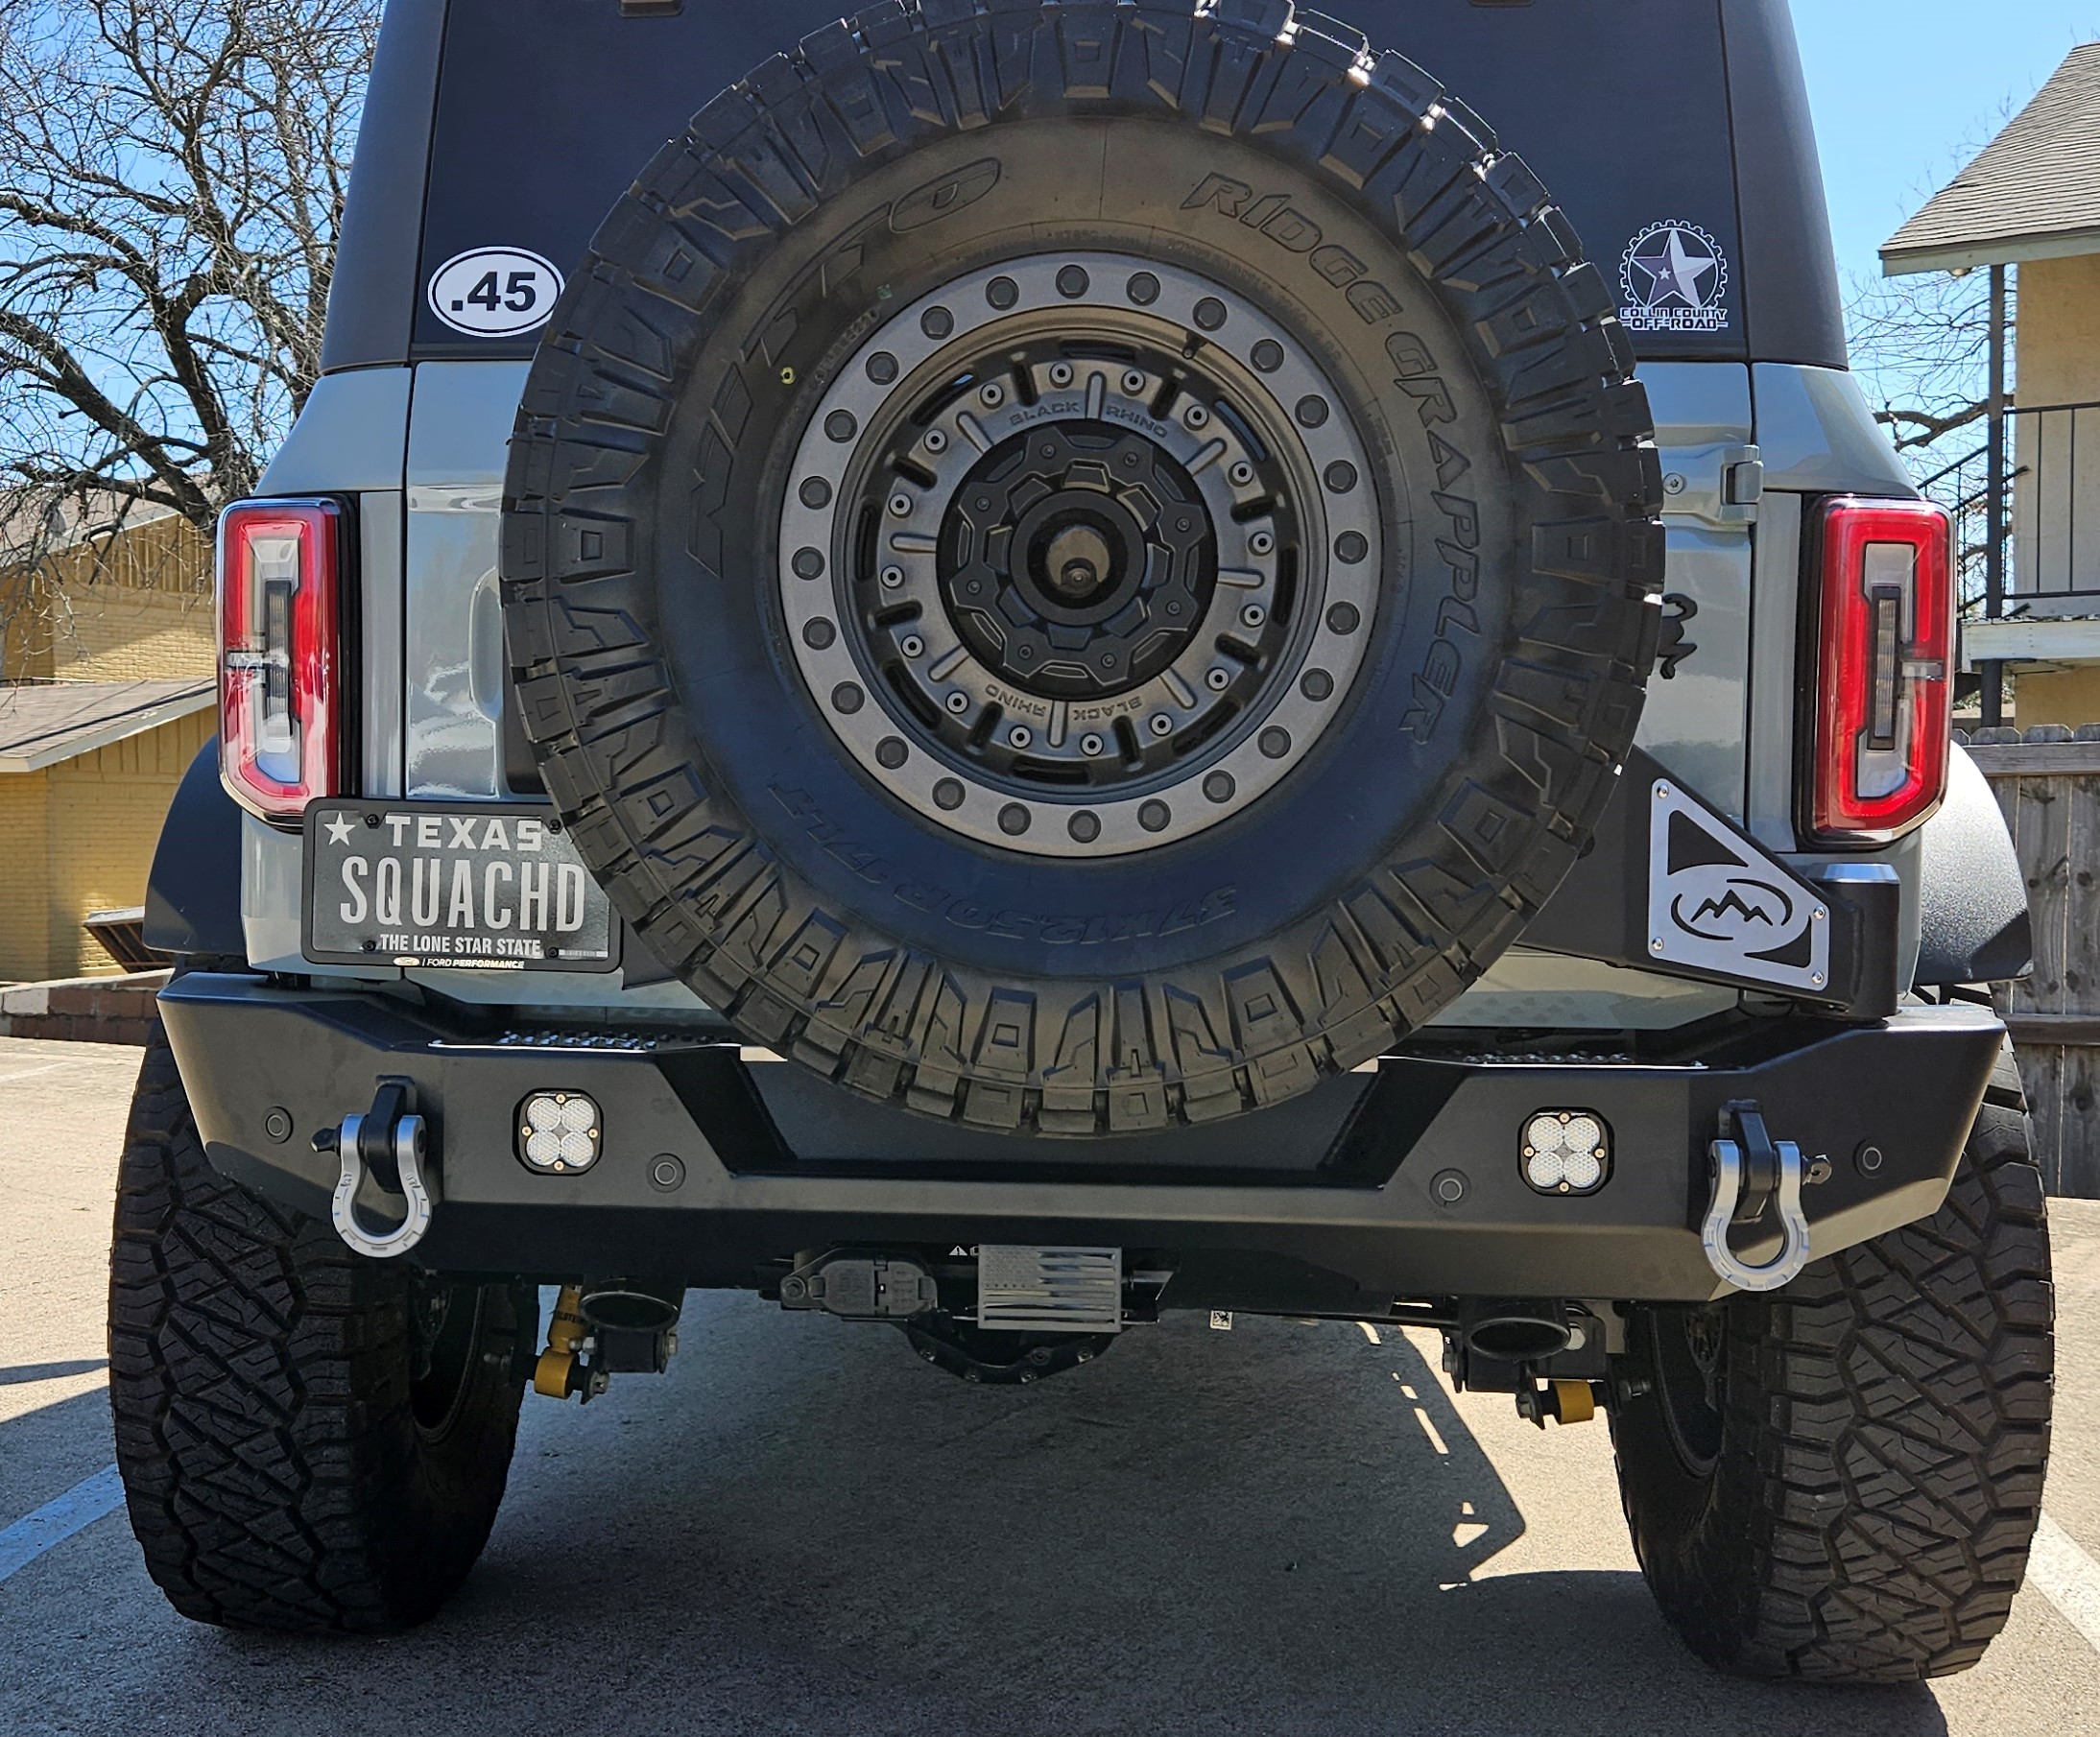 Ford Bronco The perfect Bronco license plate mount? - Lobo Off-Road Adjustable Rear License Plate Mount -- Install DIY Guide & Review Tag 1